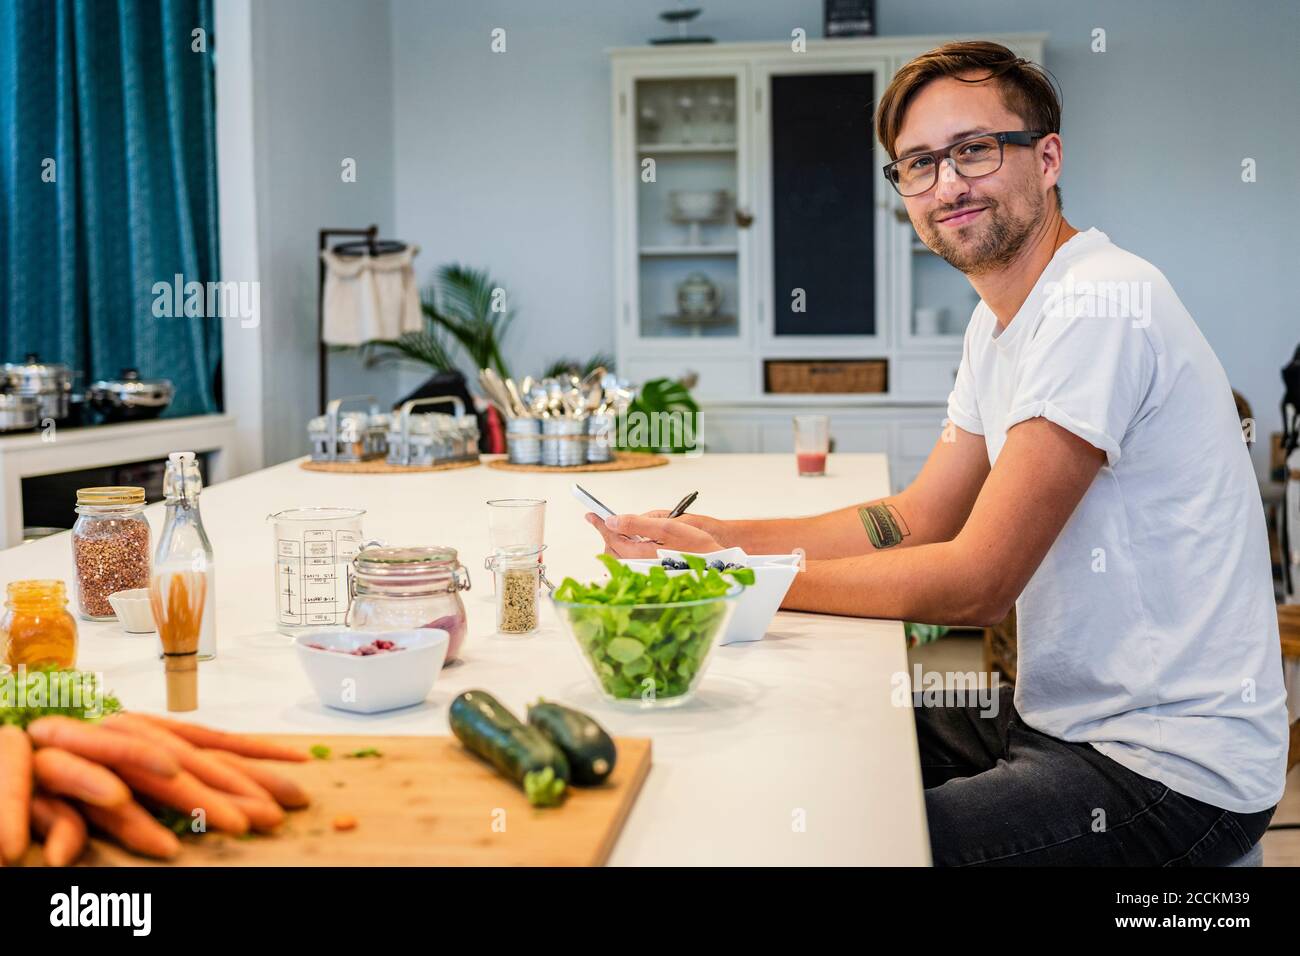 Smiling male student sitting at kitchen island in cooking school Stock Photo